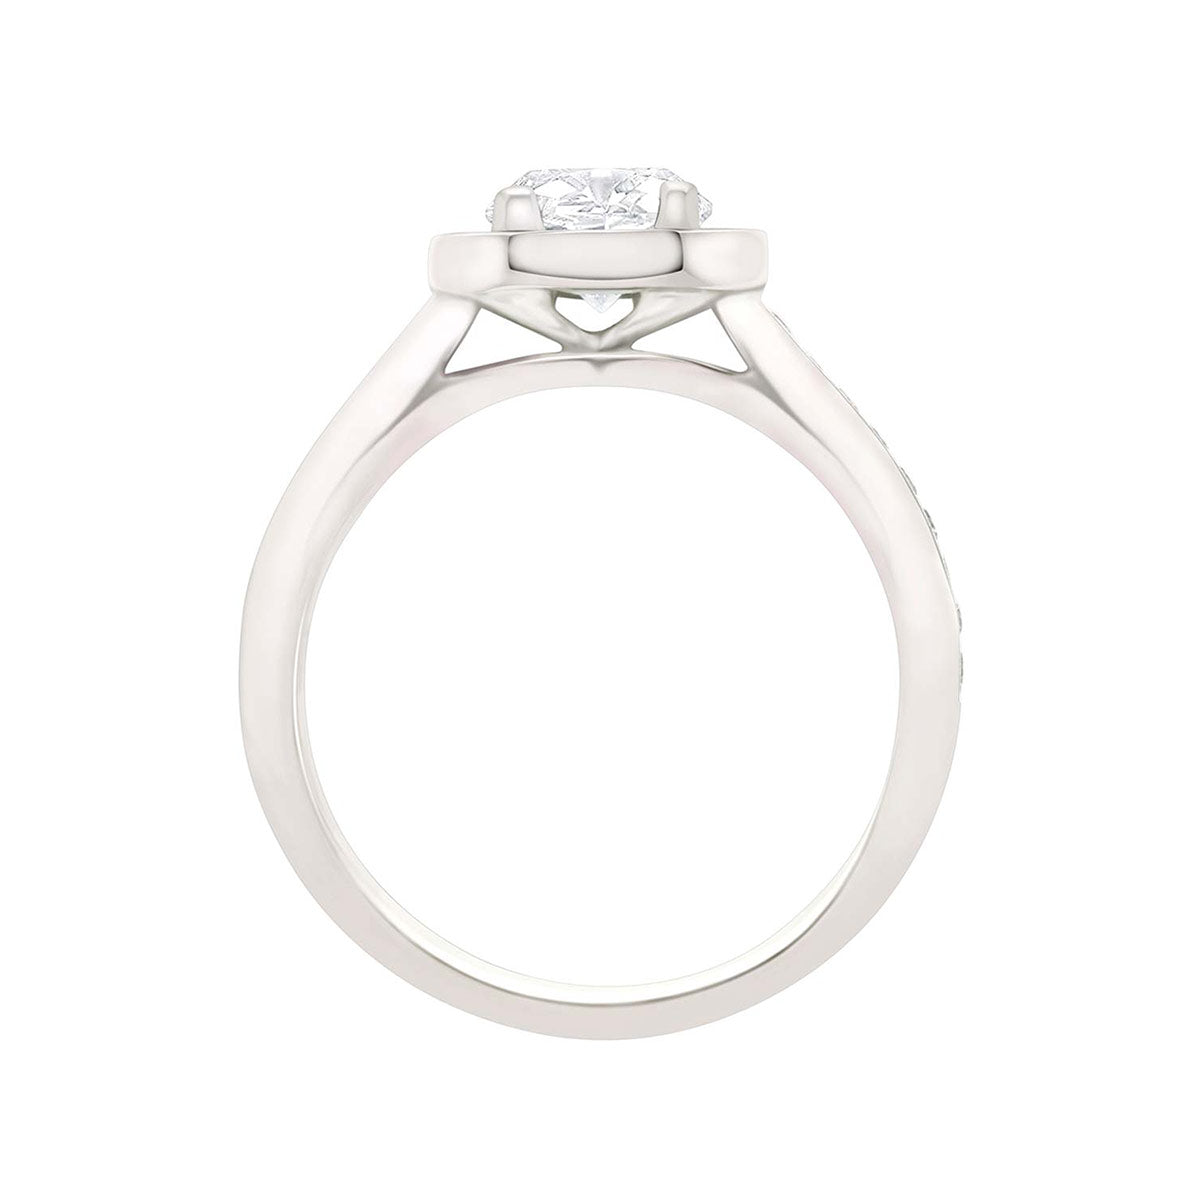 Pavé Halo Diamond Ring in White Gold in an upright position with white background